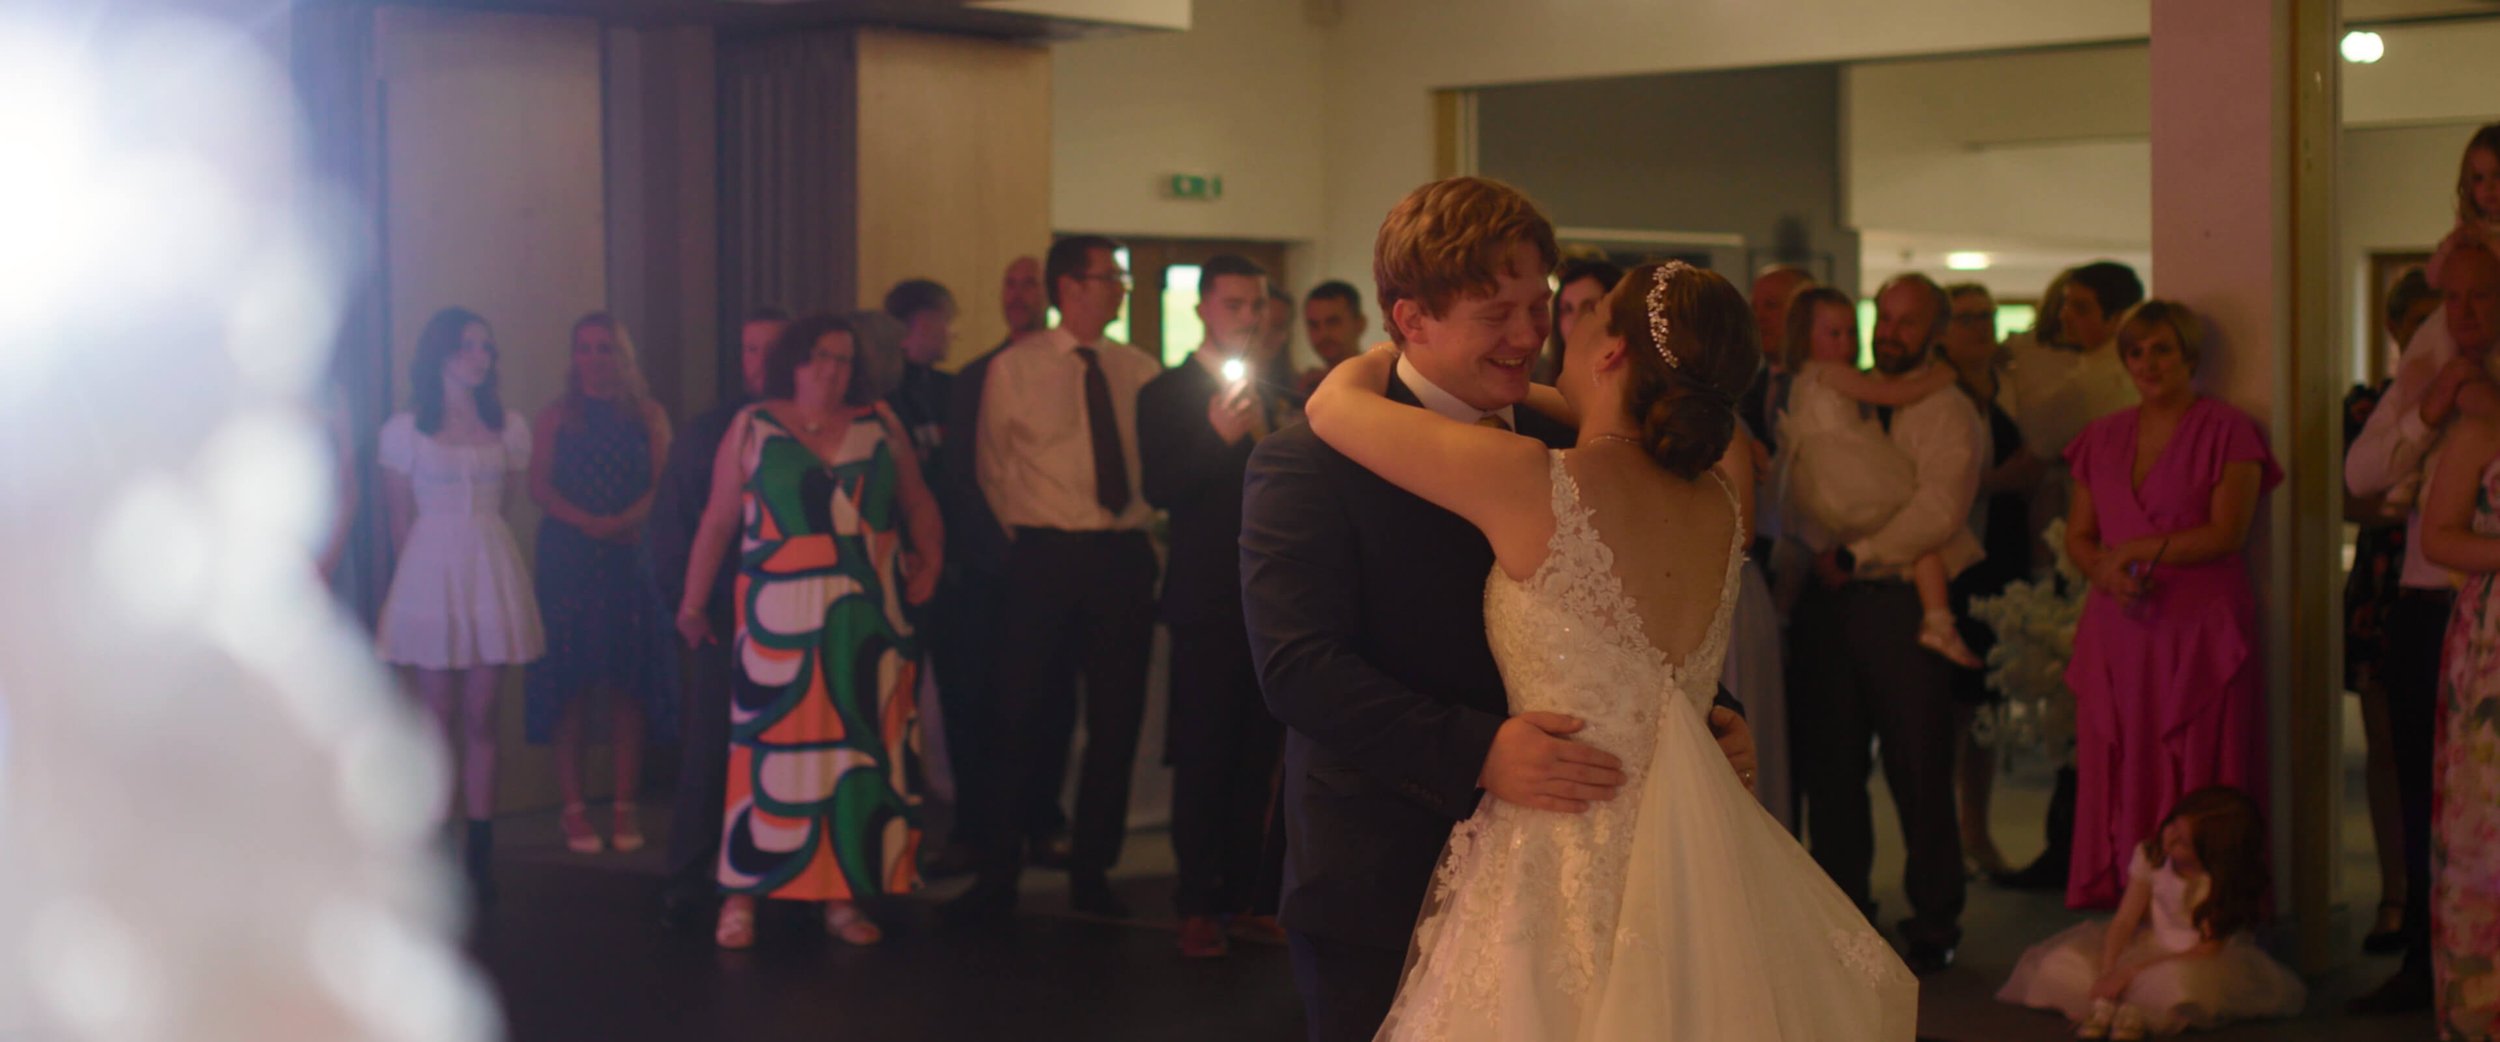 Dael &amp; Emma holding each other during the first wedding dance as the guests watch and film on their phones